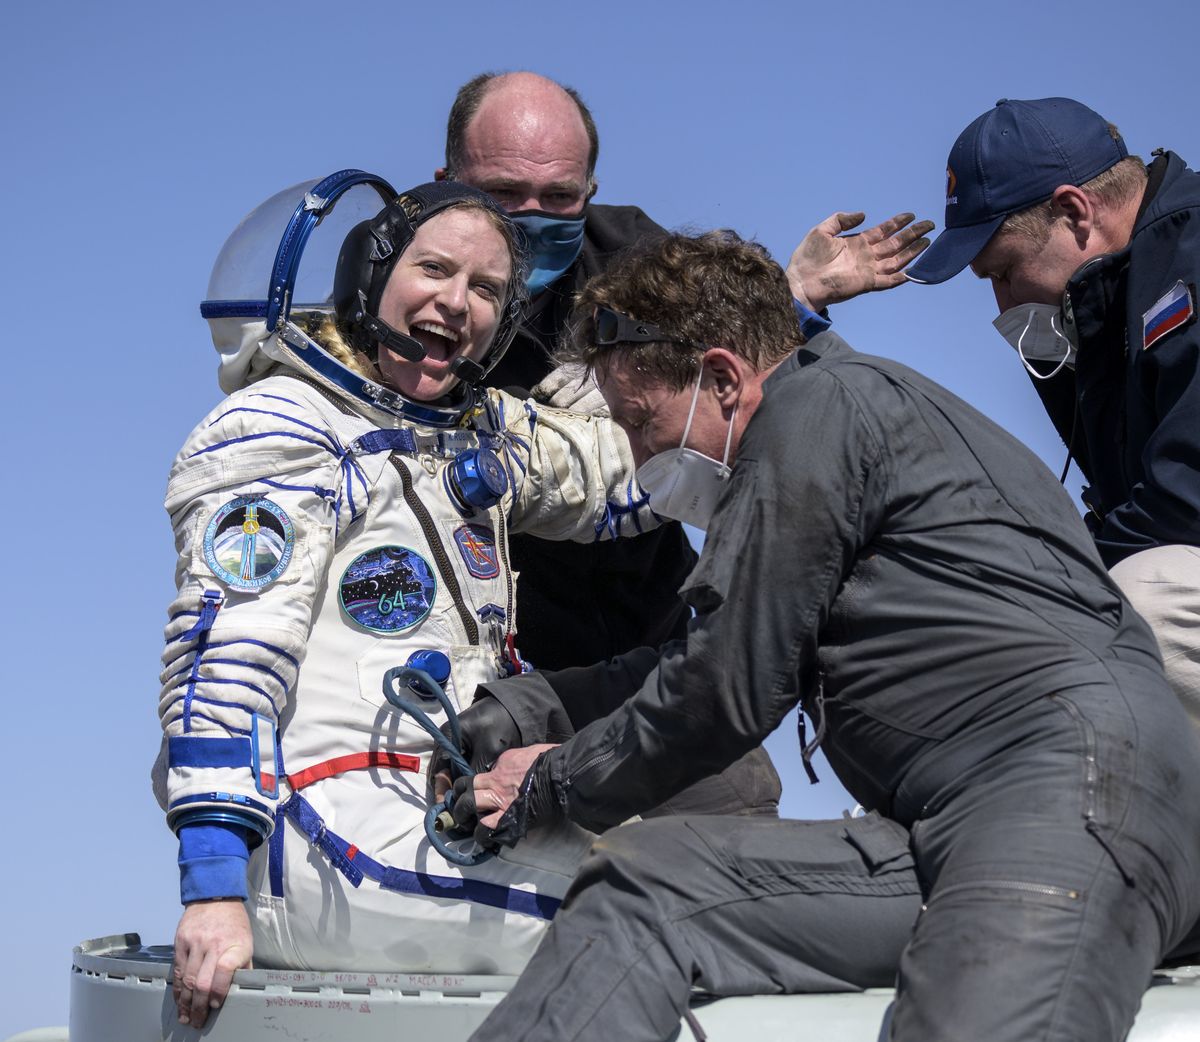 Expedition 64 NASA astronaut Kate Rubins is helped out of the Soyuz MS-17 spacecraft after it landed Saturday in a remote area near the town of Zhezkazgan, Kazakhstan.  (Bill Ingalls)